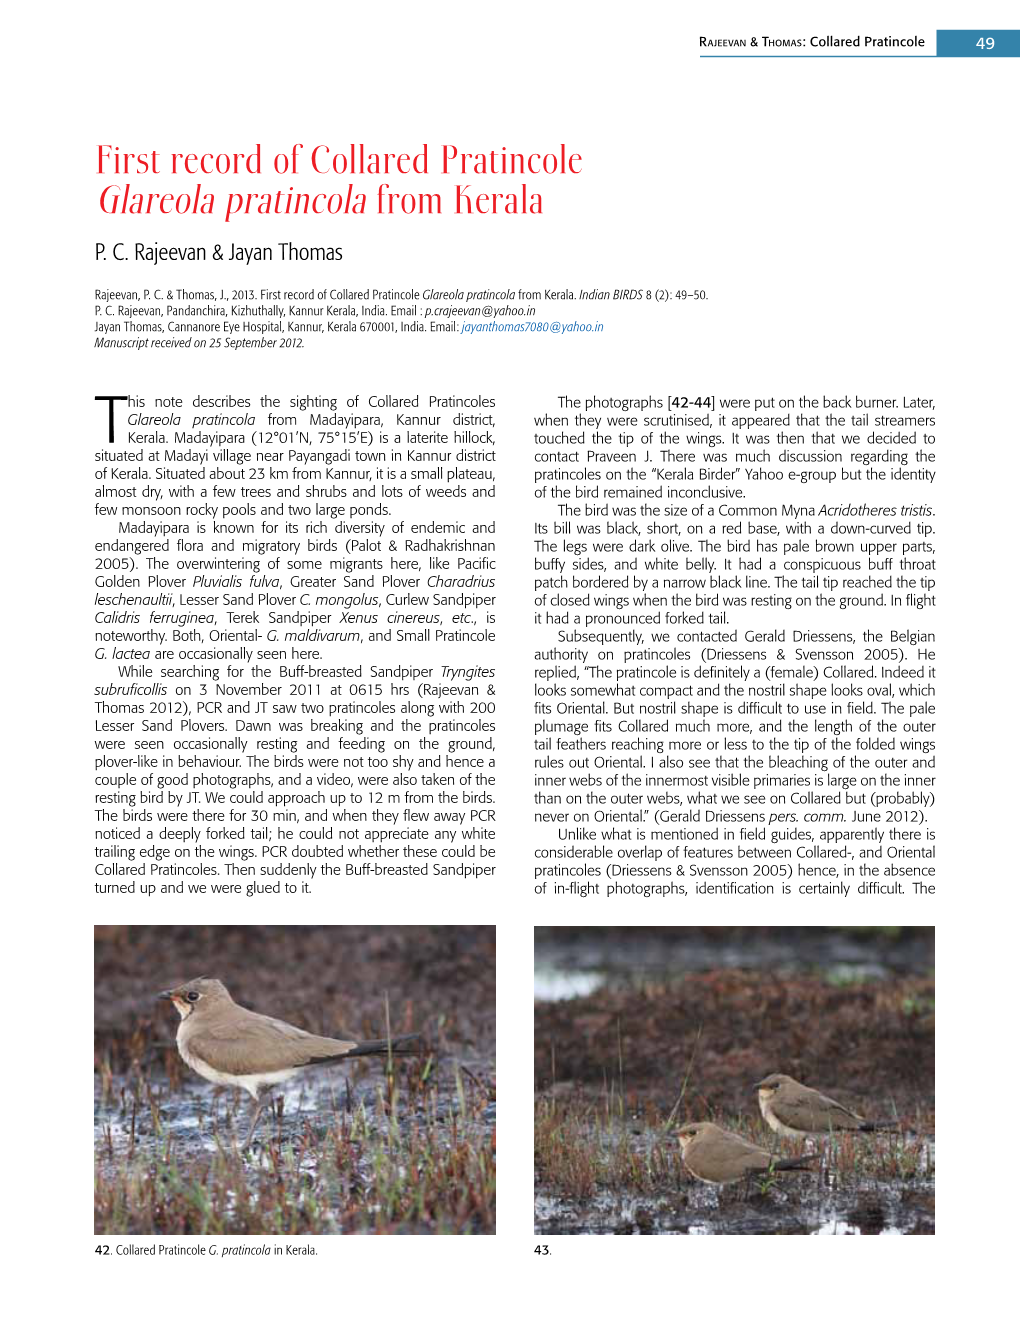 First Record of Collared Pratincole Glareola Pratincola from Kerala P